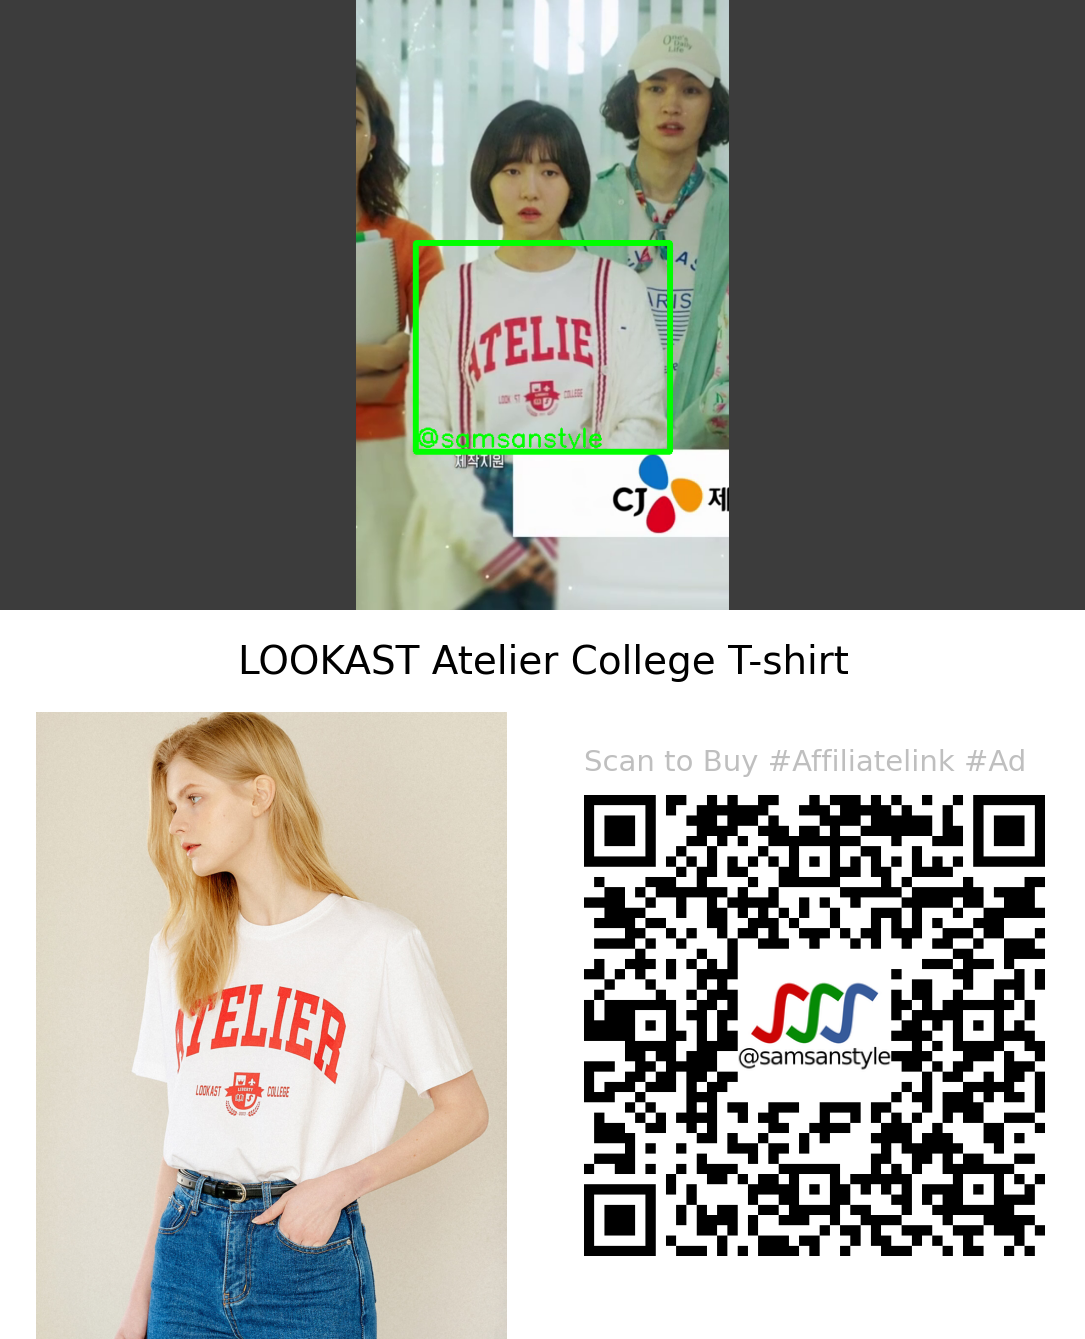 Joo Hyunyoung | Behind Every Star E06 | LOOKAST Atelier College T-shirt